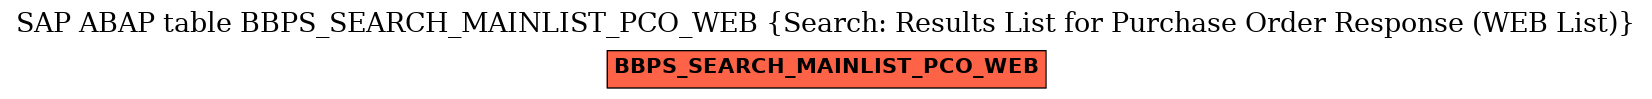 E-R Diagram for table BBPS_SEARCH_MAINLIST_PCO_WEB (Search: Results List for Purchase Order Response (WEB List))